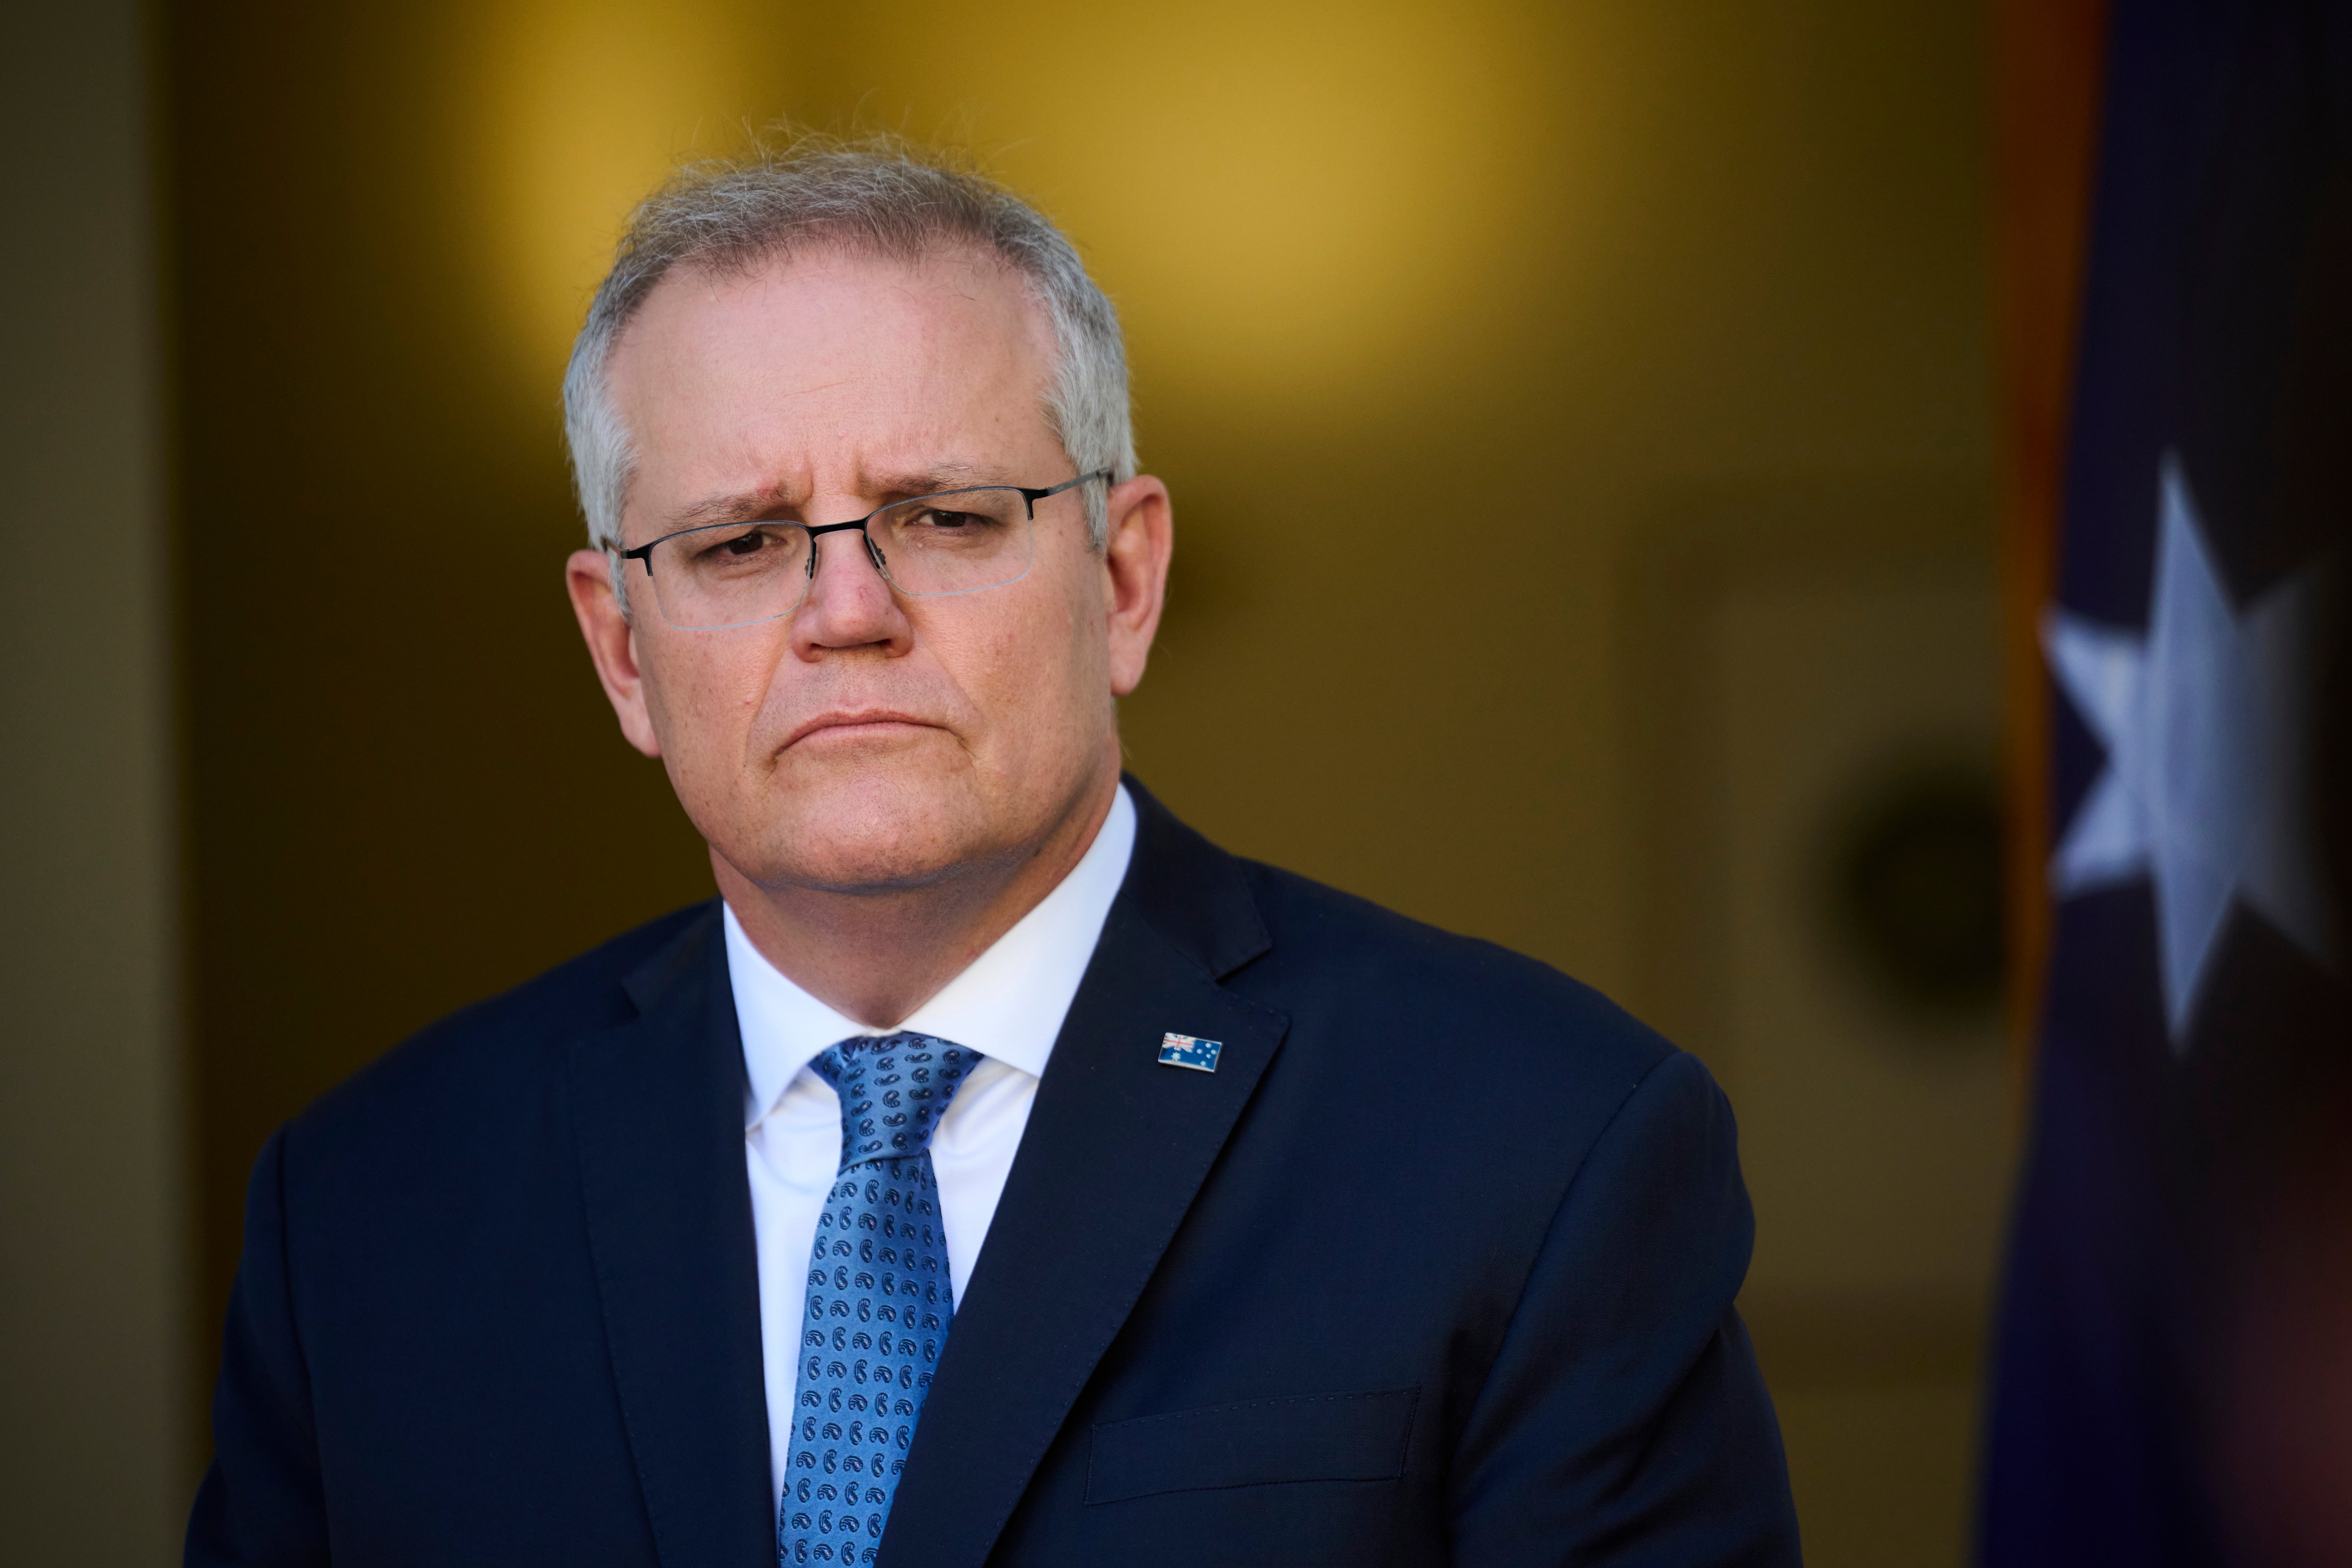 Australian PM Scott Morrison has promised to secure up to 52 million kits this month, making them available to workers for daily tests